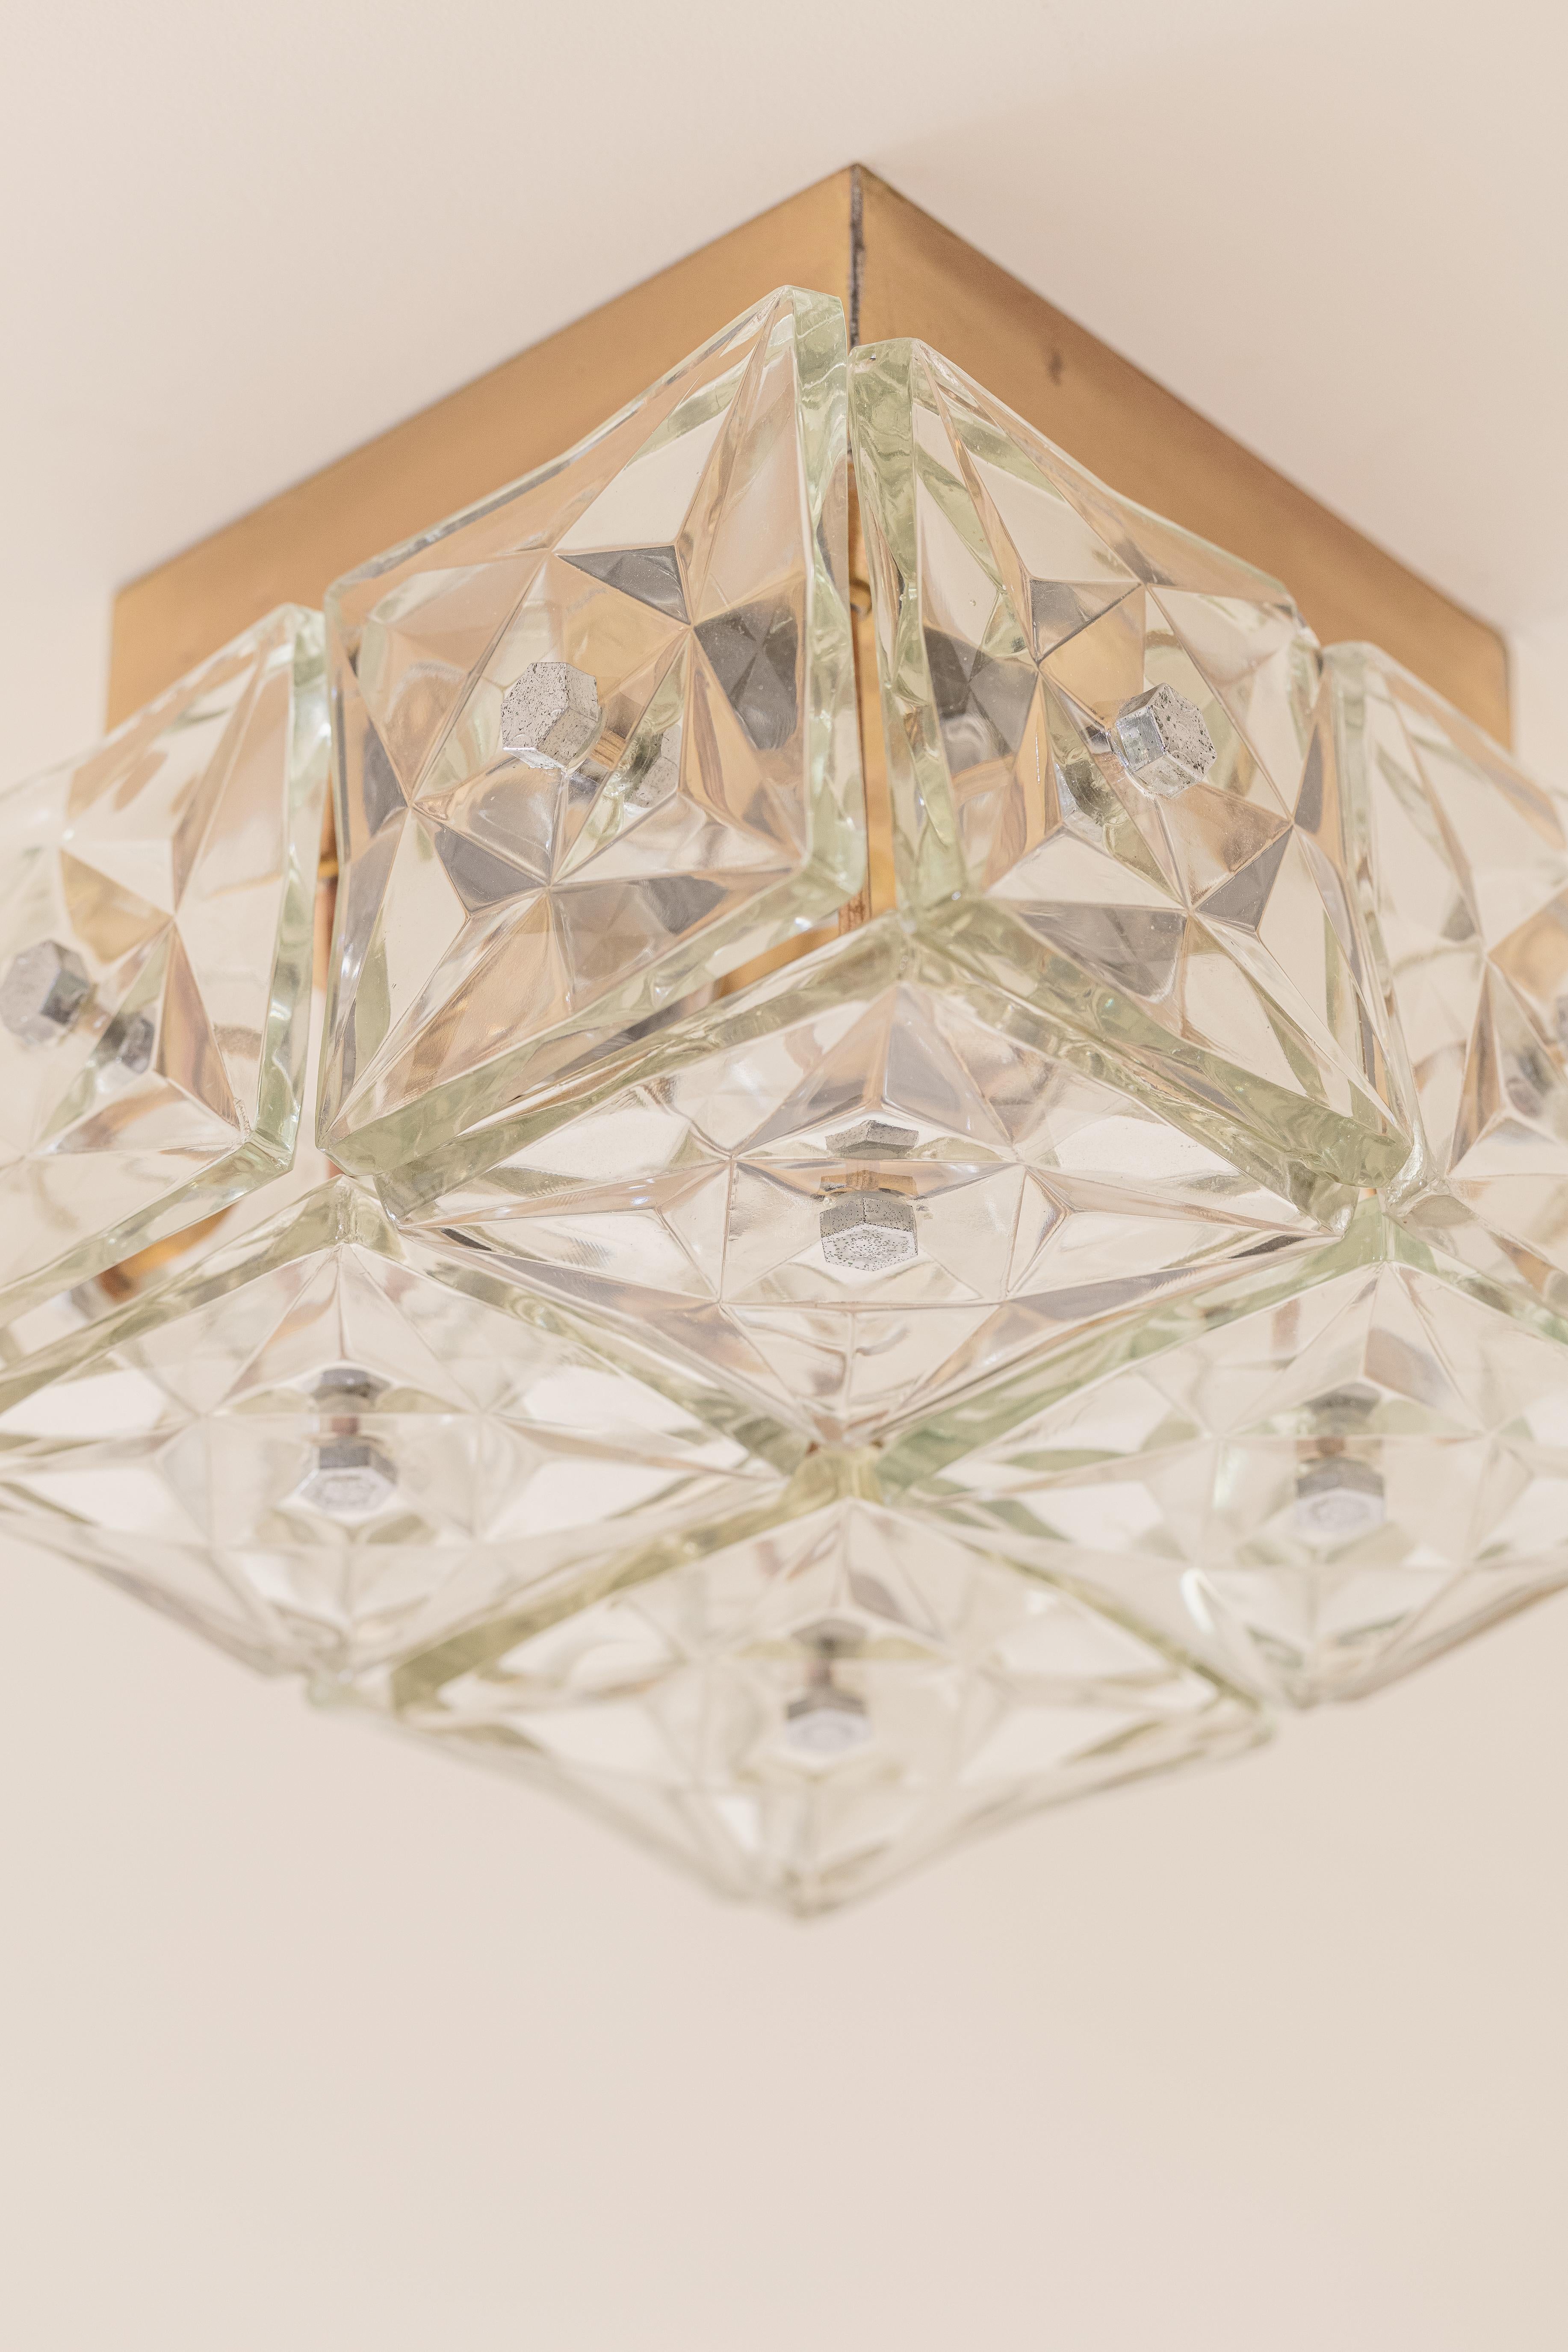 Brass and Prismatic Glass Ceiling Lamp, Brazilian Company Lustres Pelotas, 1950s For Sale 4